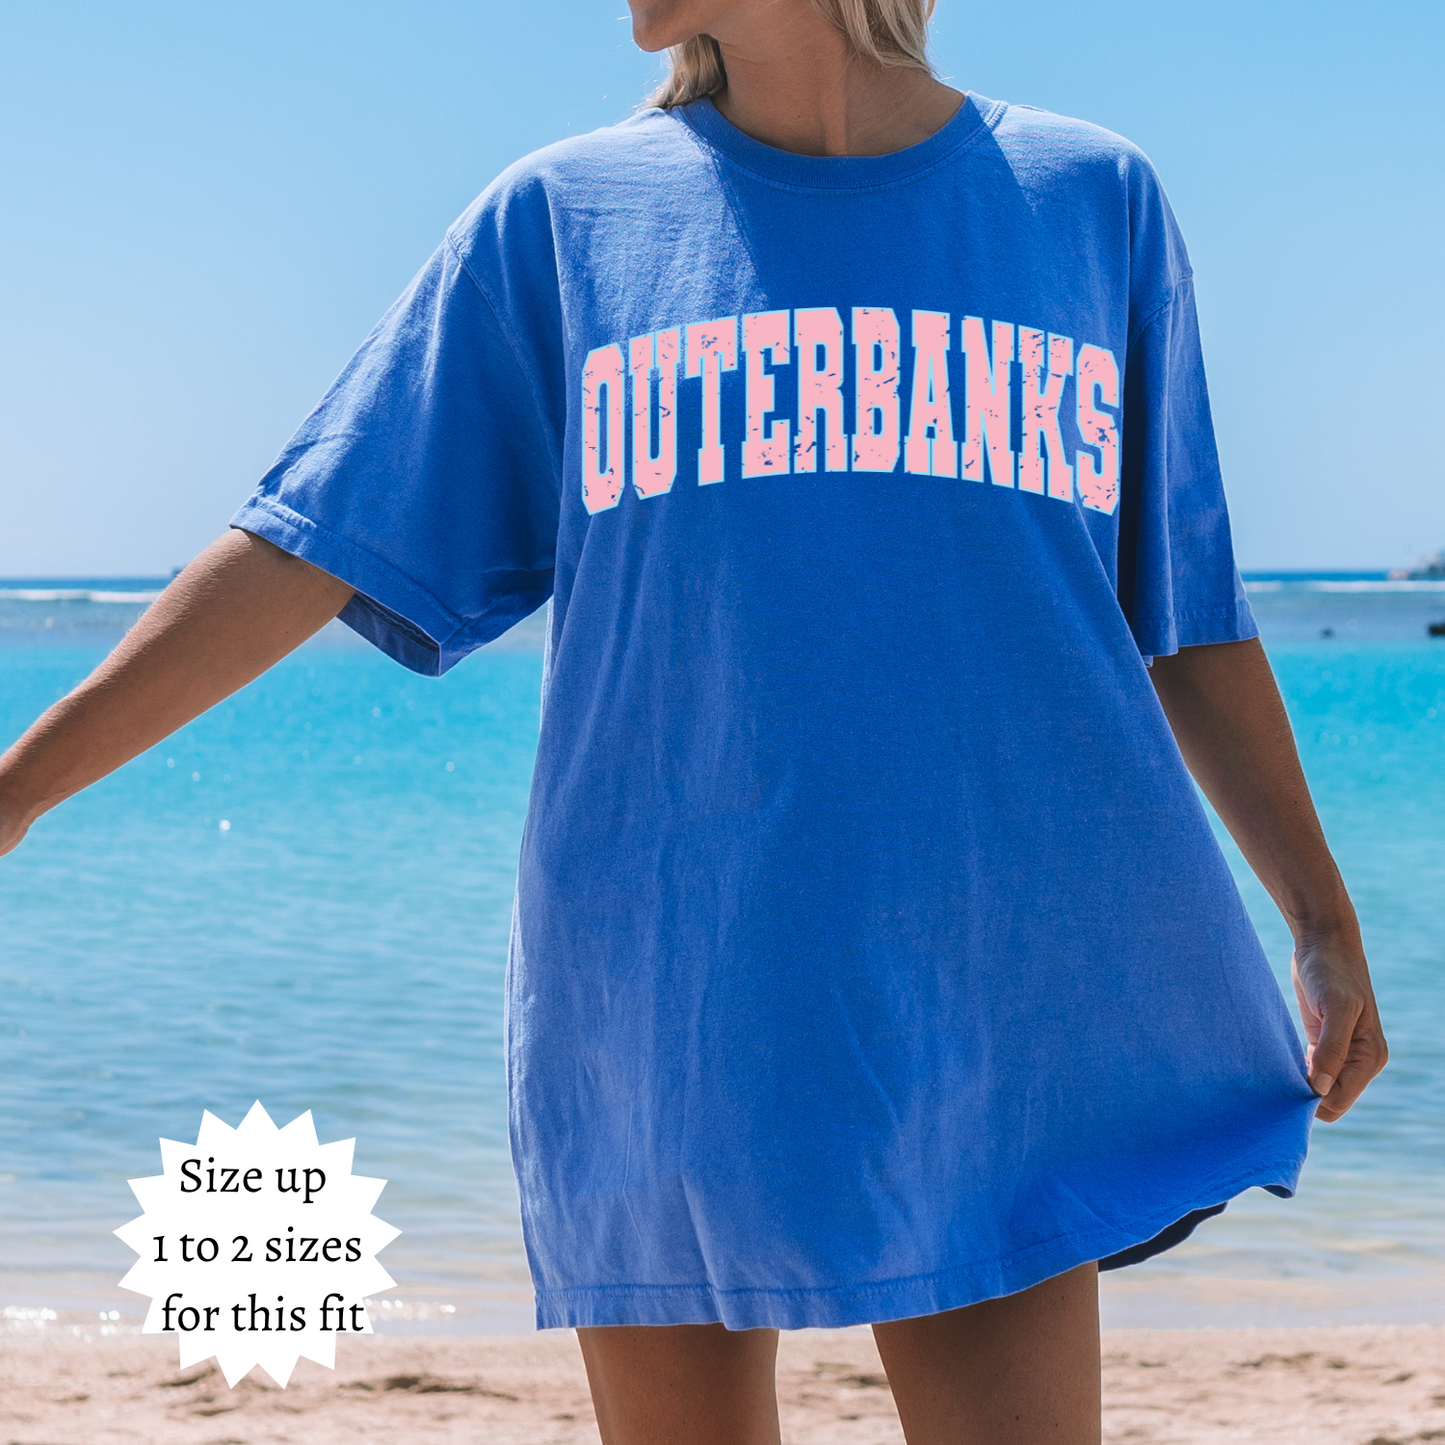 OUTERBANKS Comfort Colors Graphic Tee